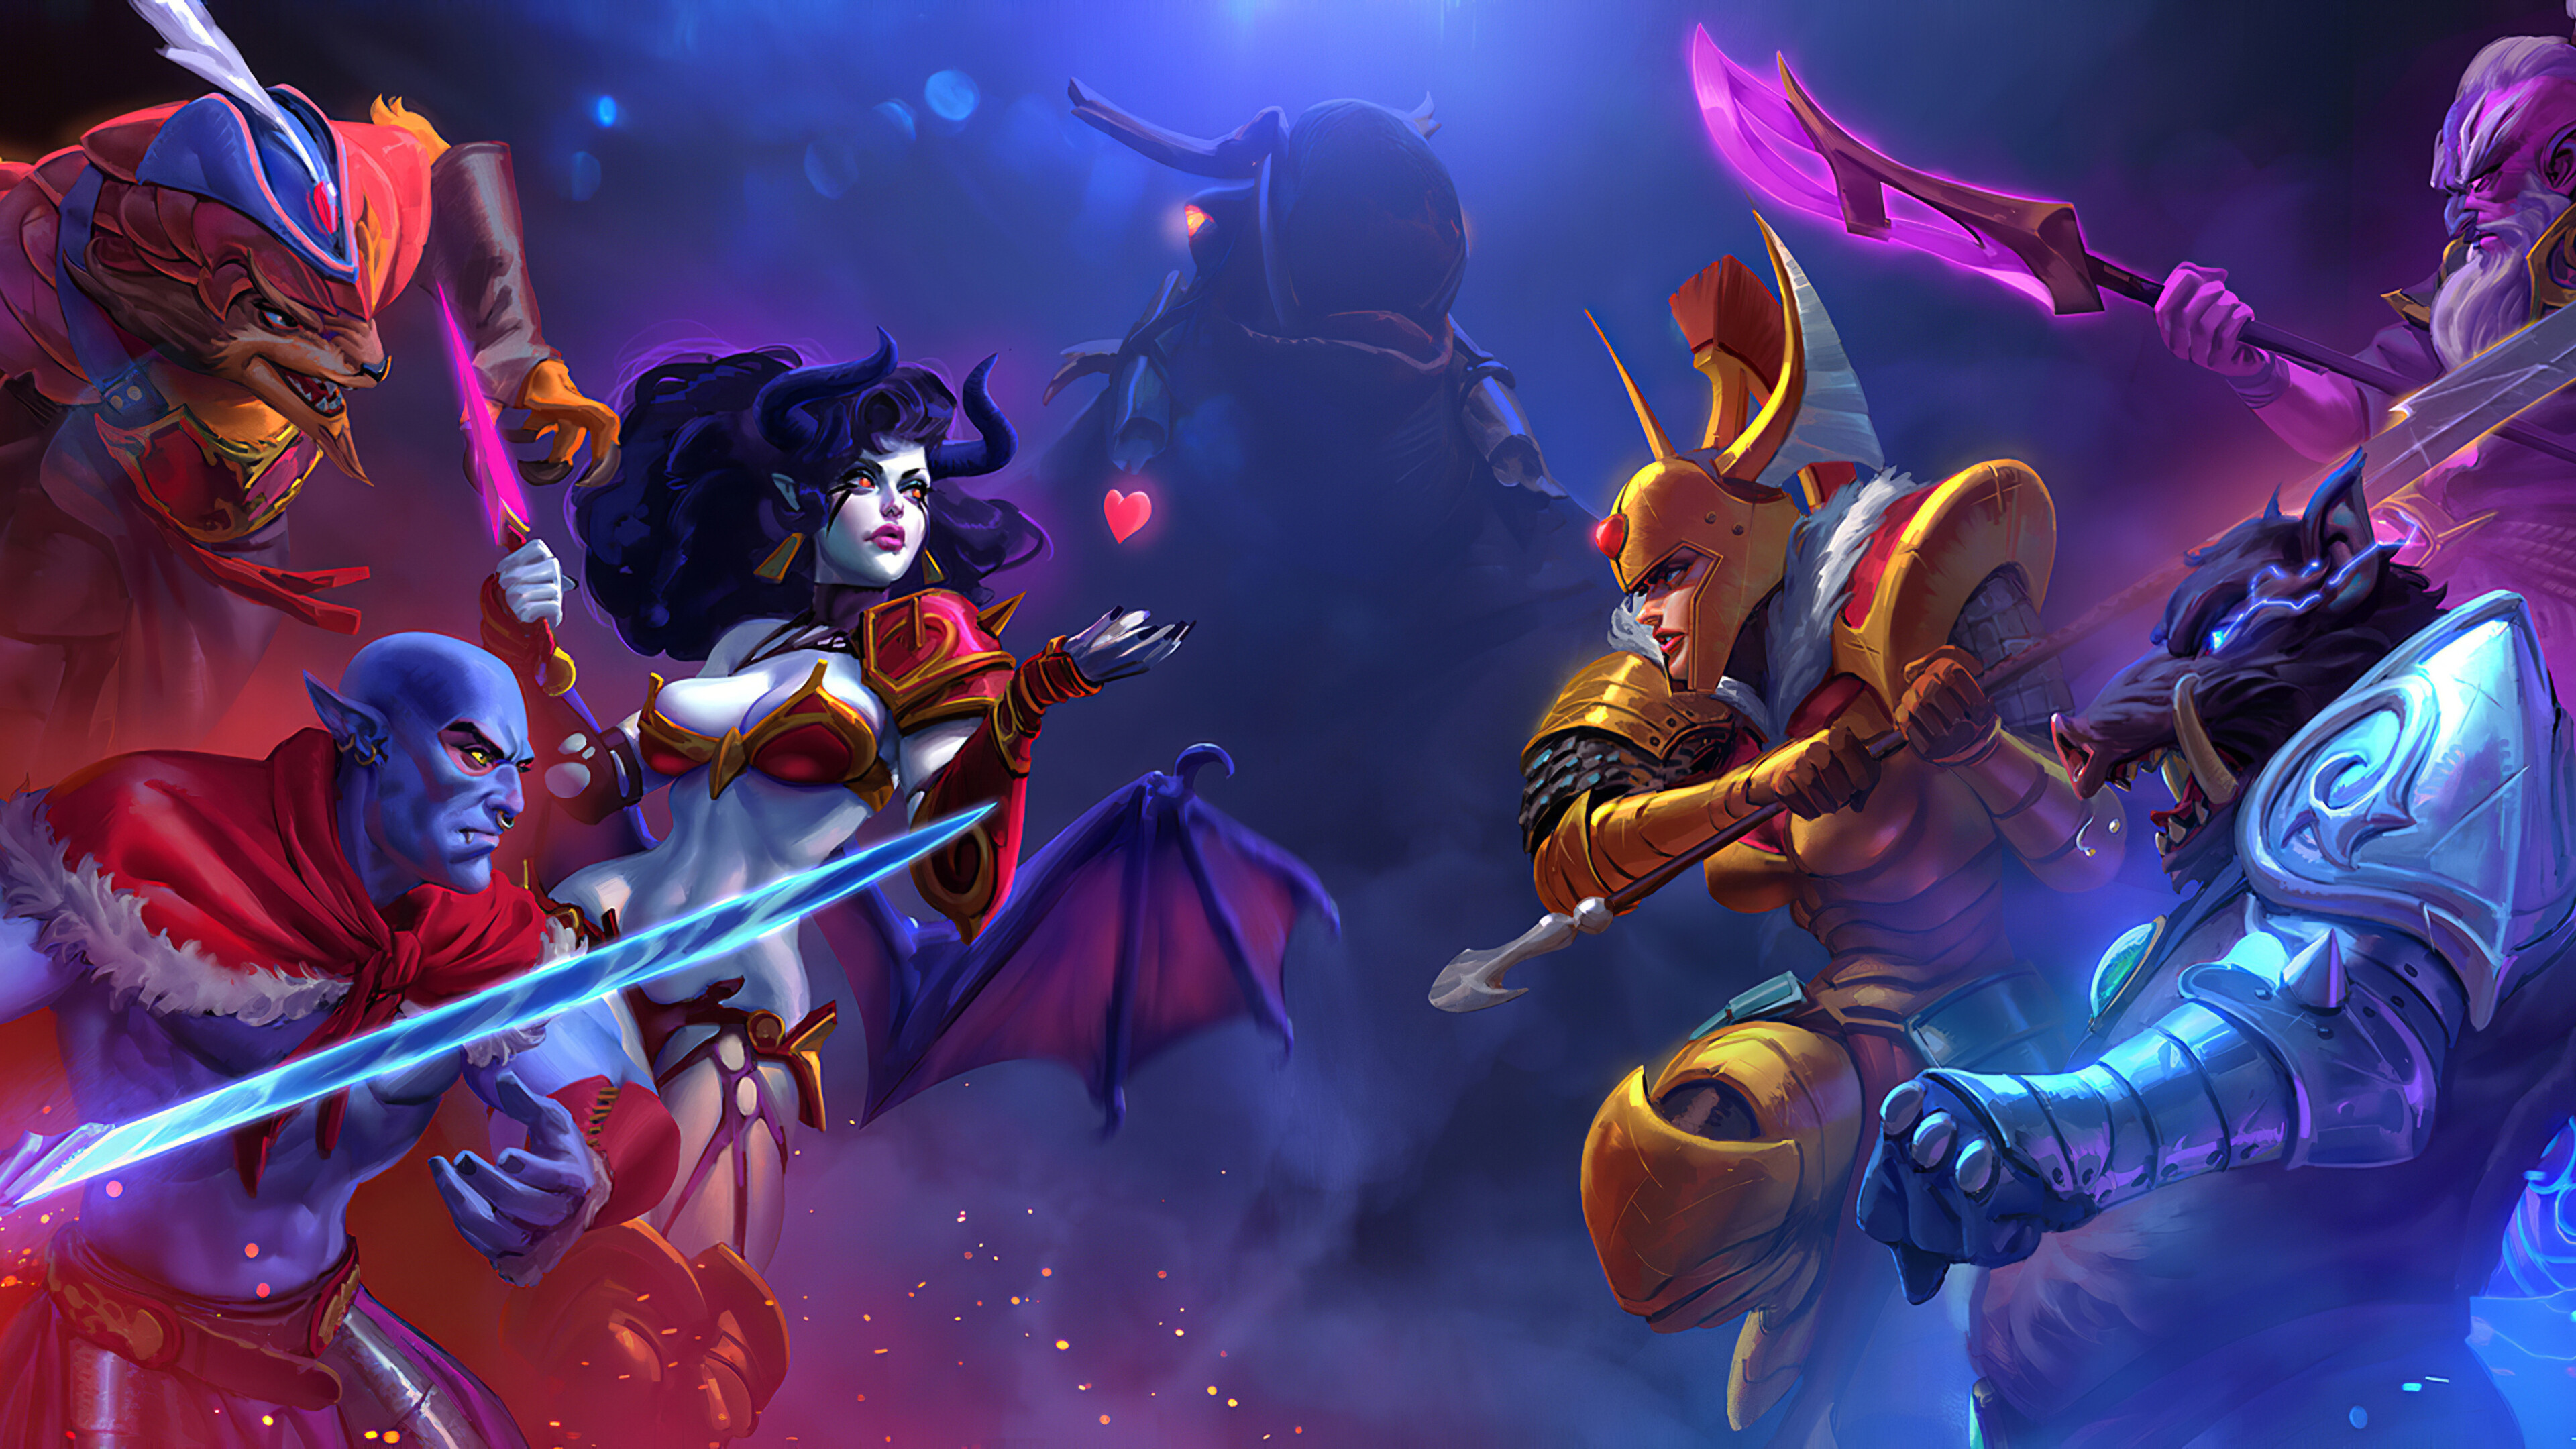 Dota 2: Heroes are divided into two primary roles, known as the core and support. 3840x2160 4K Background.